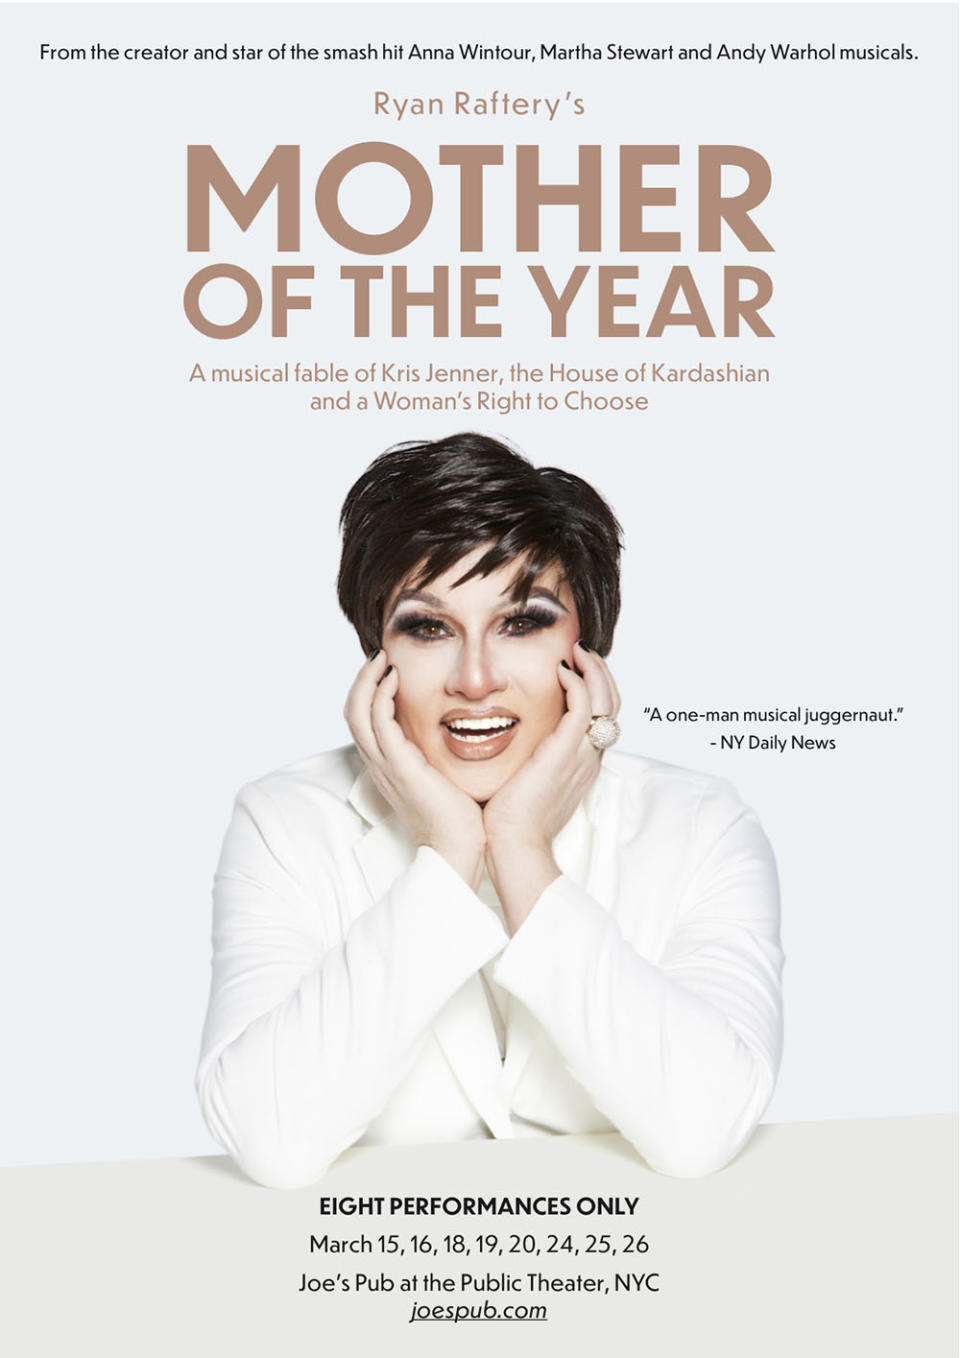 Ryan Raftery stars as Kris Jenner in &quot;Mother of the Year&quot; at Joe's Pub in New York City.